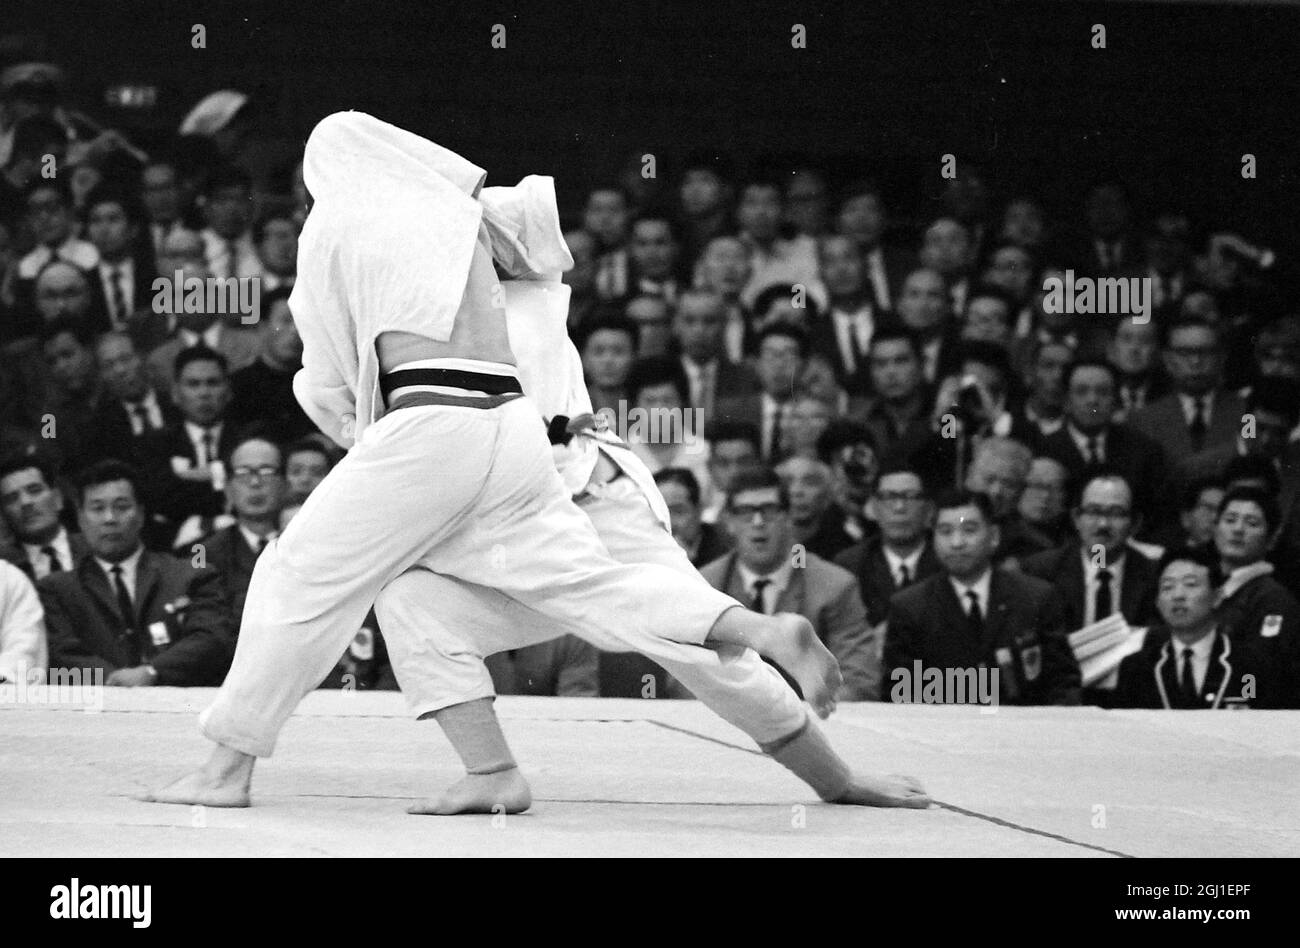 OLYMPICS, OLYMPIC SPORT GAMES - THE XVIII 18TH OLYMPIAD IN TOKYO, JAPAN -  JUDO IN ACTION NETHERLANDS J GOUWELEEUW VRUSSIA'S A KIKNADZE  ;  23 OCTOBER 1964 Stock Photo